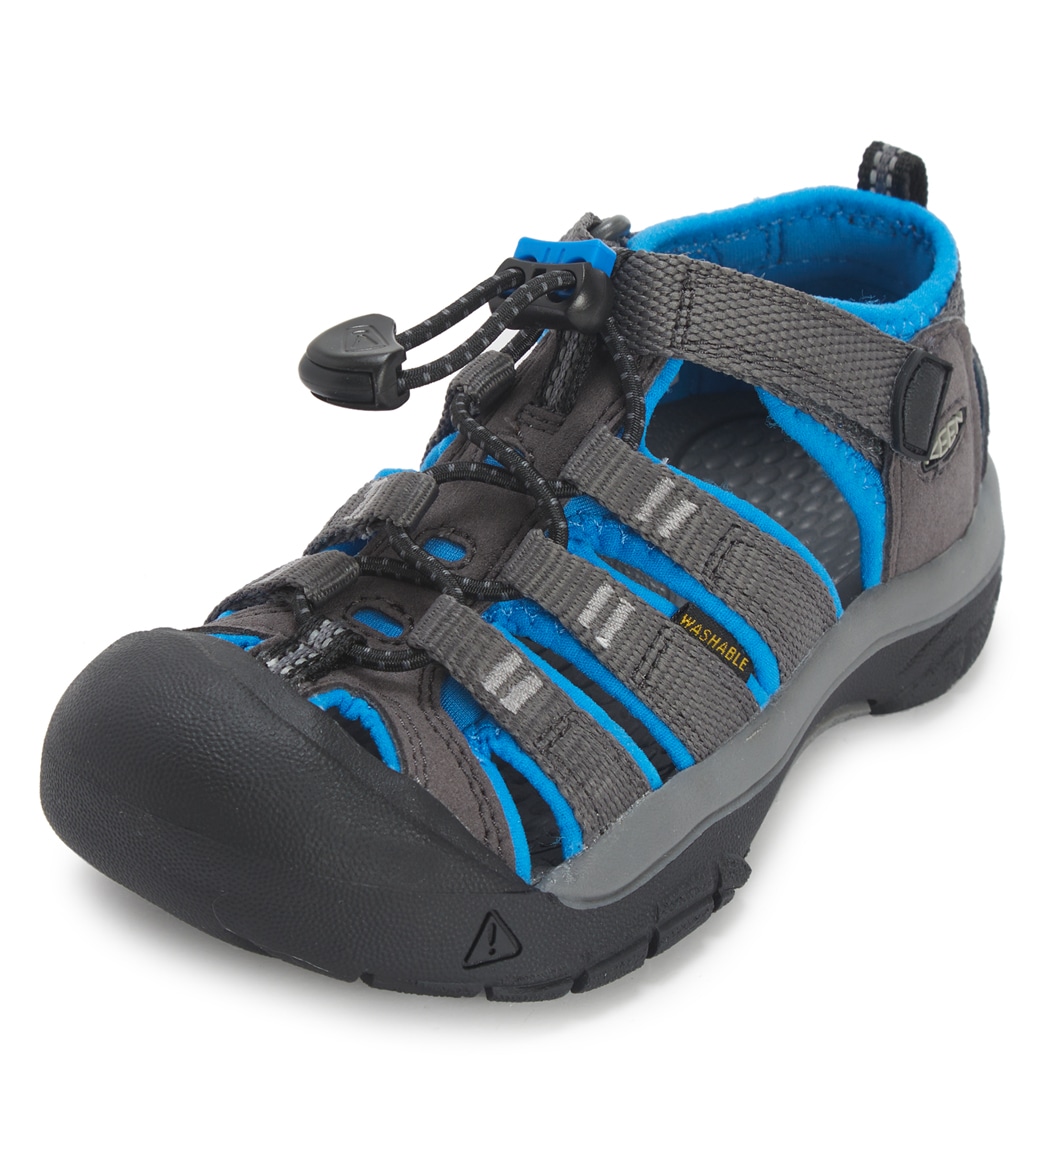 Keen Youth's Newport H2 Water Shoes - Magnet/Brilliant Blue 10 - Swimoutlet.com